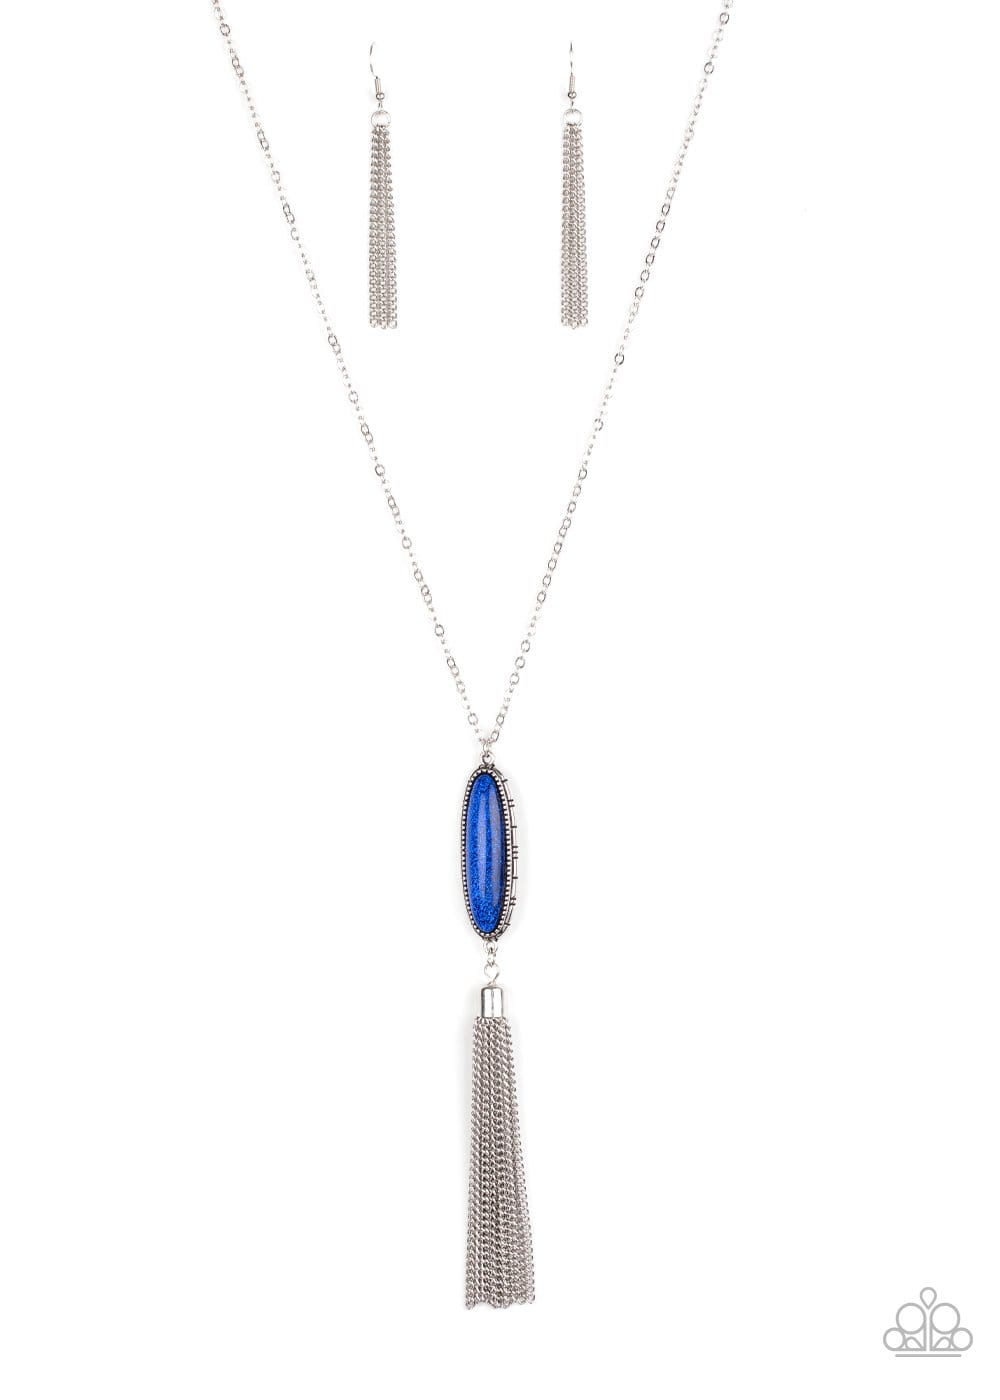 Stay Cool - Blue - Paparzzi Necklace